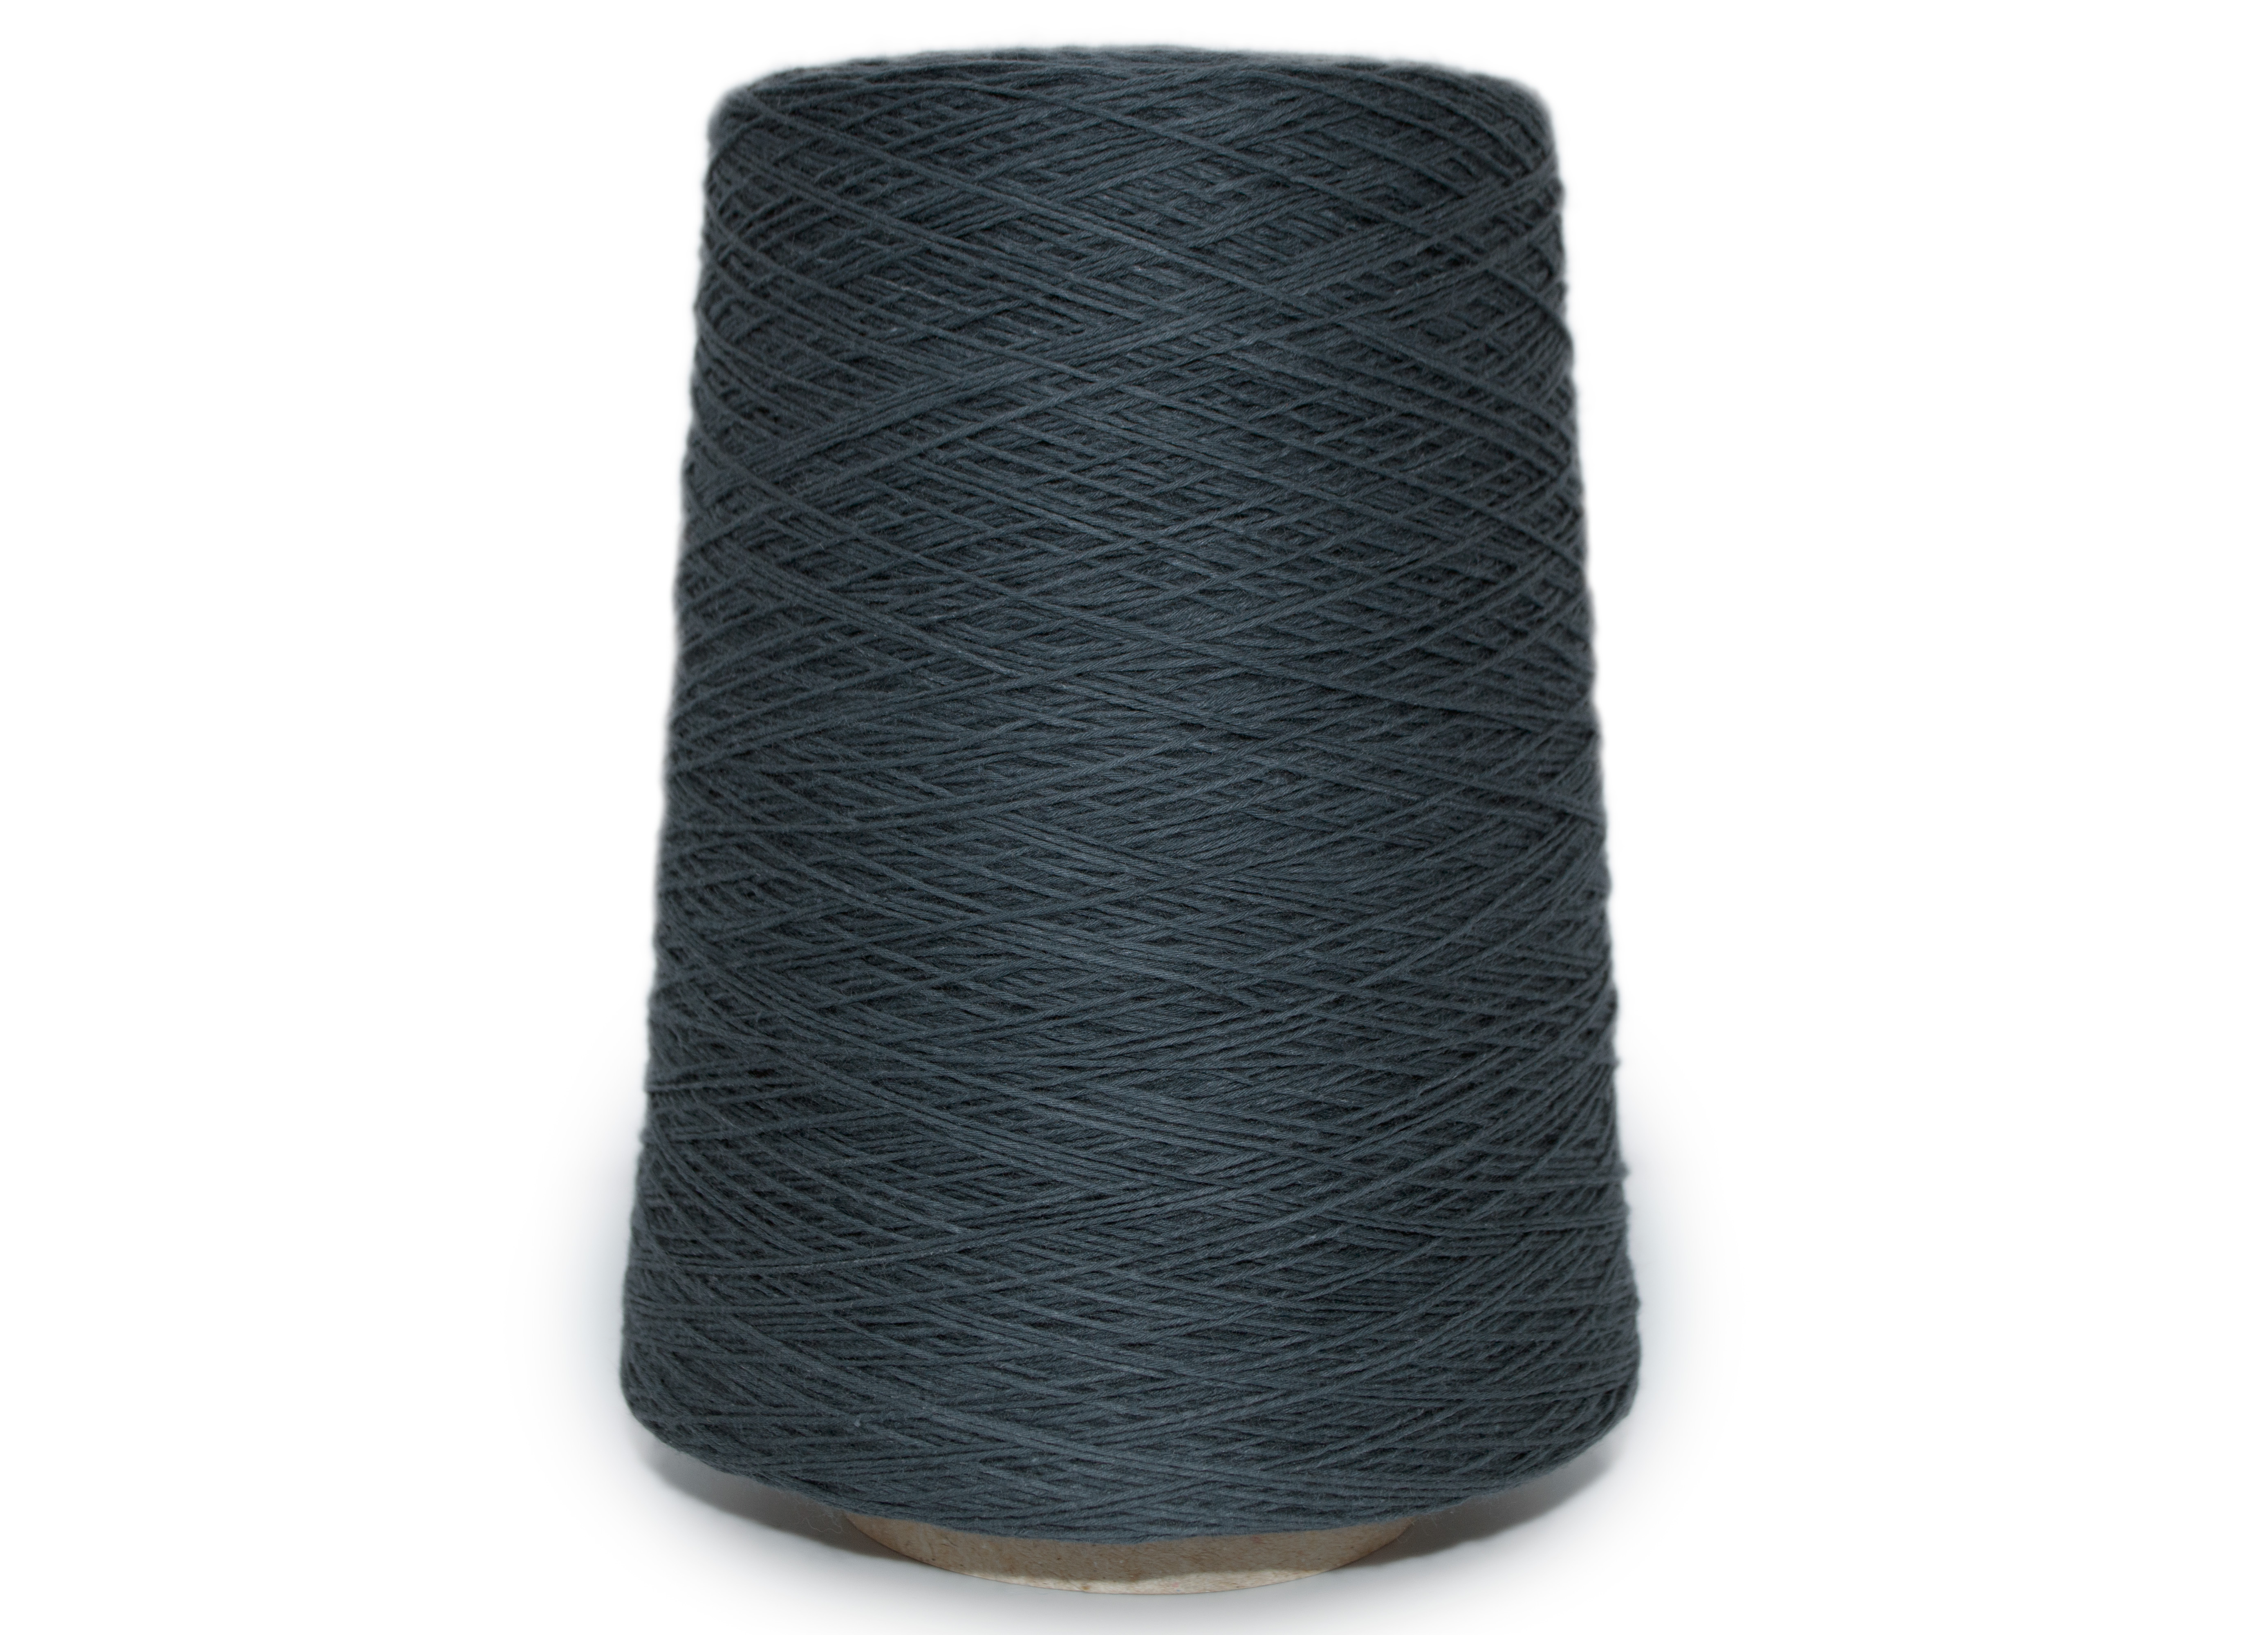 Bulky Weight Lacery Yarn 100g - 2 Skeins - 100% Cotton - Vapor Grey - Color  110